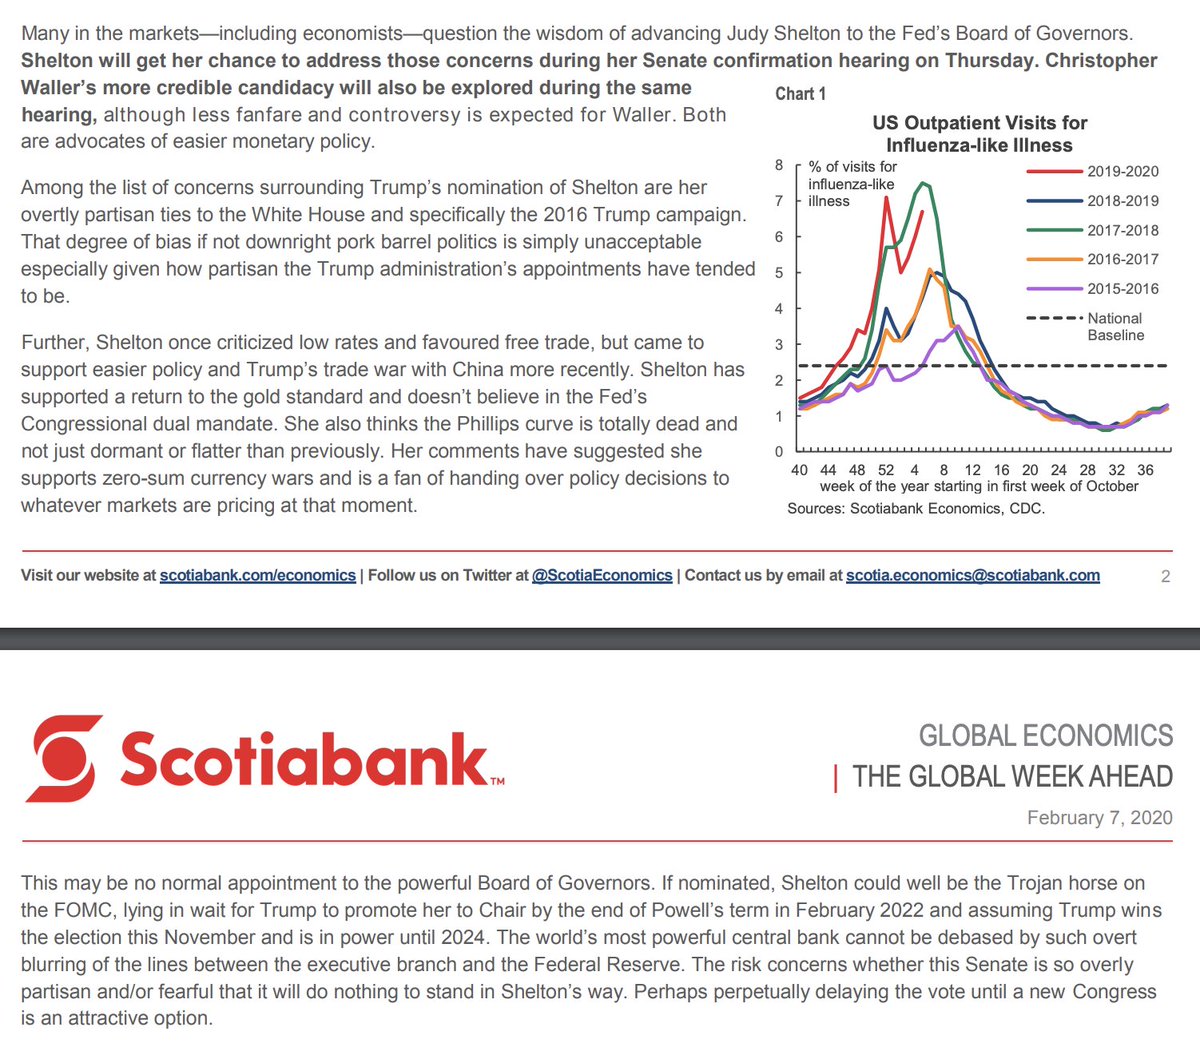 . @scotiabank on the Shelton nomination  https://www.scotiabank.com/content/dam/scotiabank/sub-brands/scotiabank-economics/english/documents/the-global-week-ahead/globalweekahead20200207.pdf "Many in the markets—including economists—question the wisdom of advancing Judy Shelton.... Shelton could well be the Trojan horse on the FOMC, lying in wait for Trump to promote her to Chair." h/t  @FiatElpis